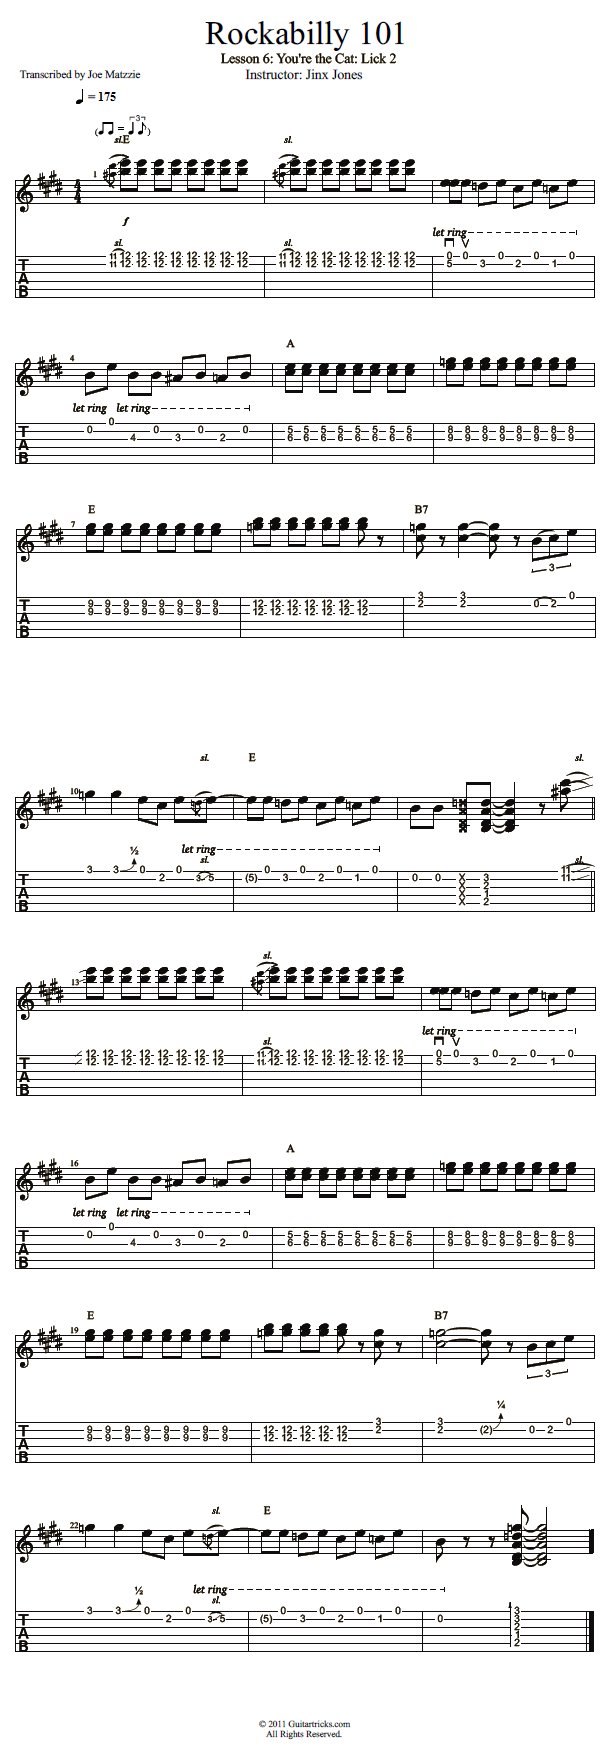 You're Still the Cat: Lick 2 song notation